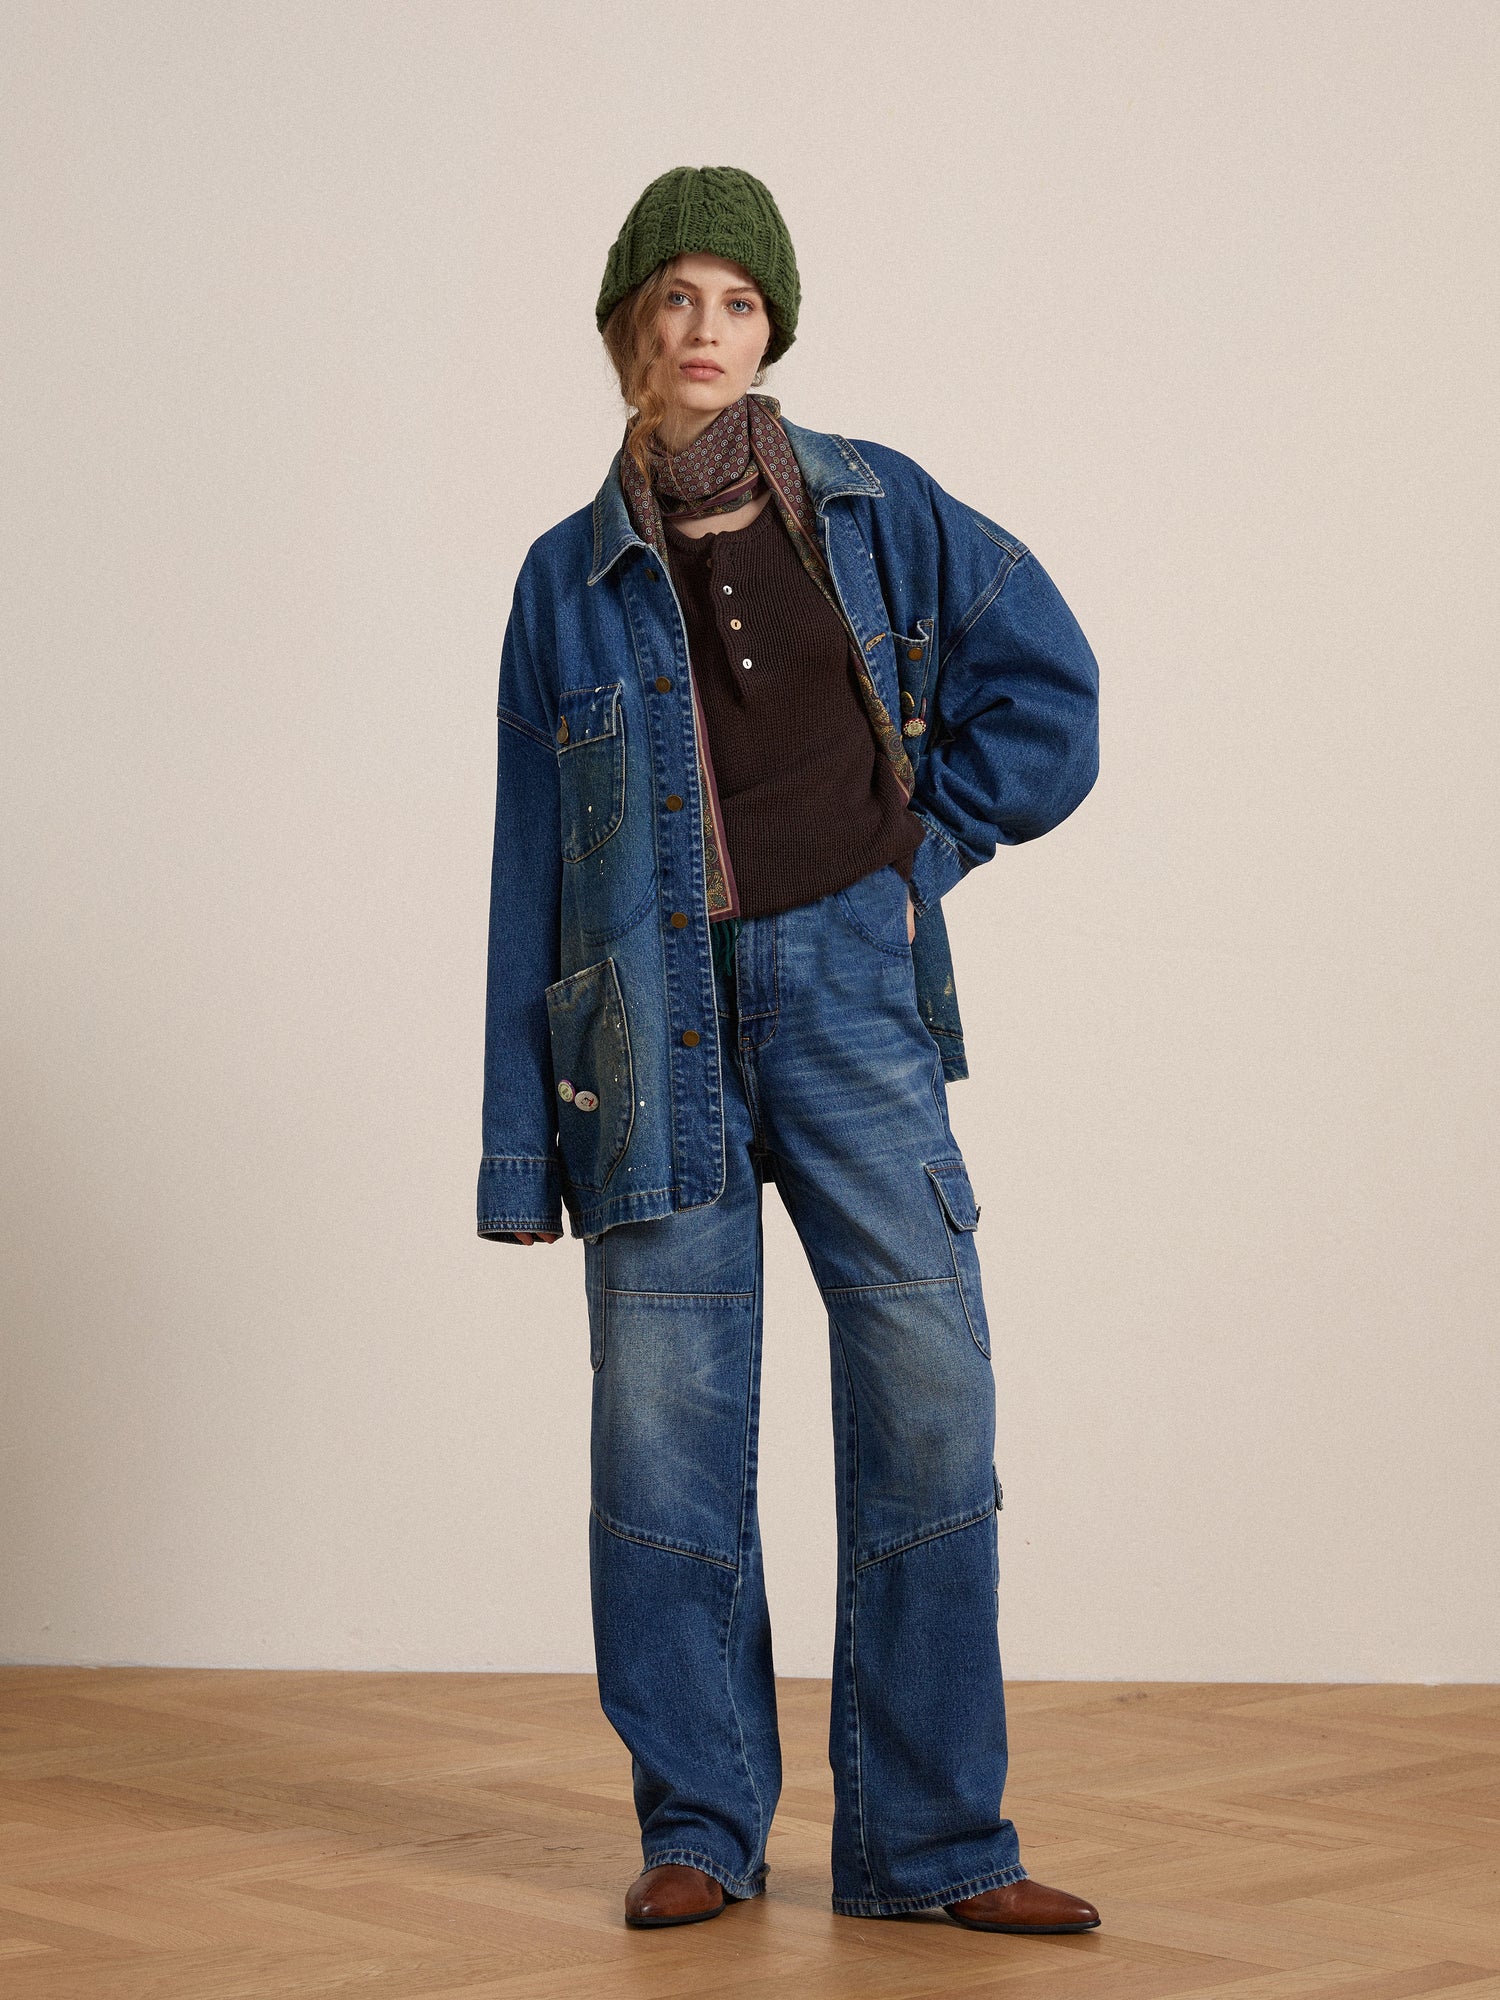 A woman in a denim jacket and Found Siwa Cargo Paneled Jeans, wearing a green knit hat and brown sweater, stands confidently in a neutral-toned room.